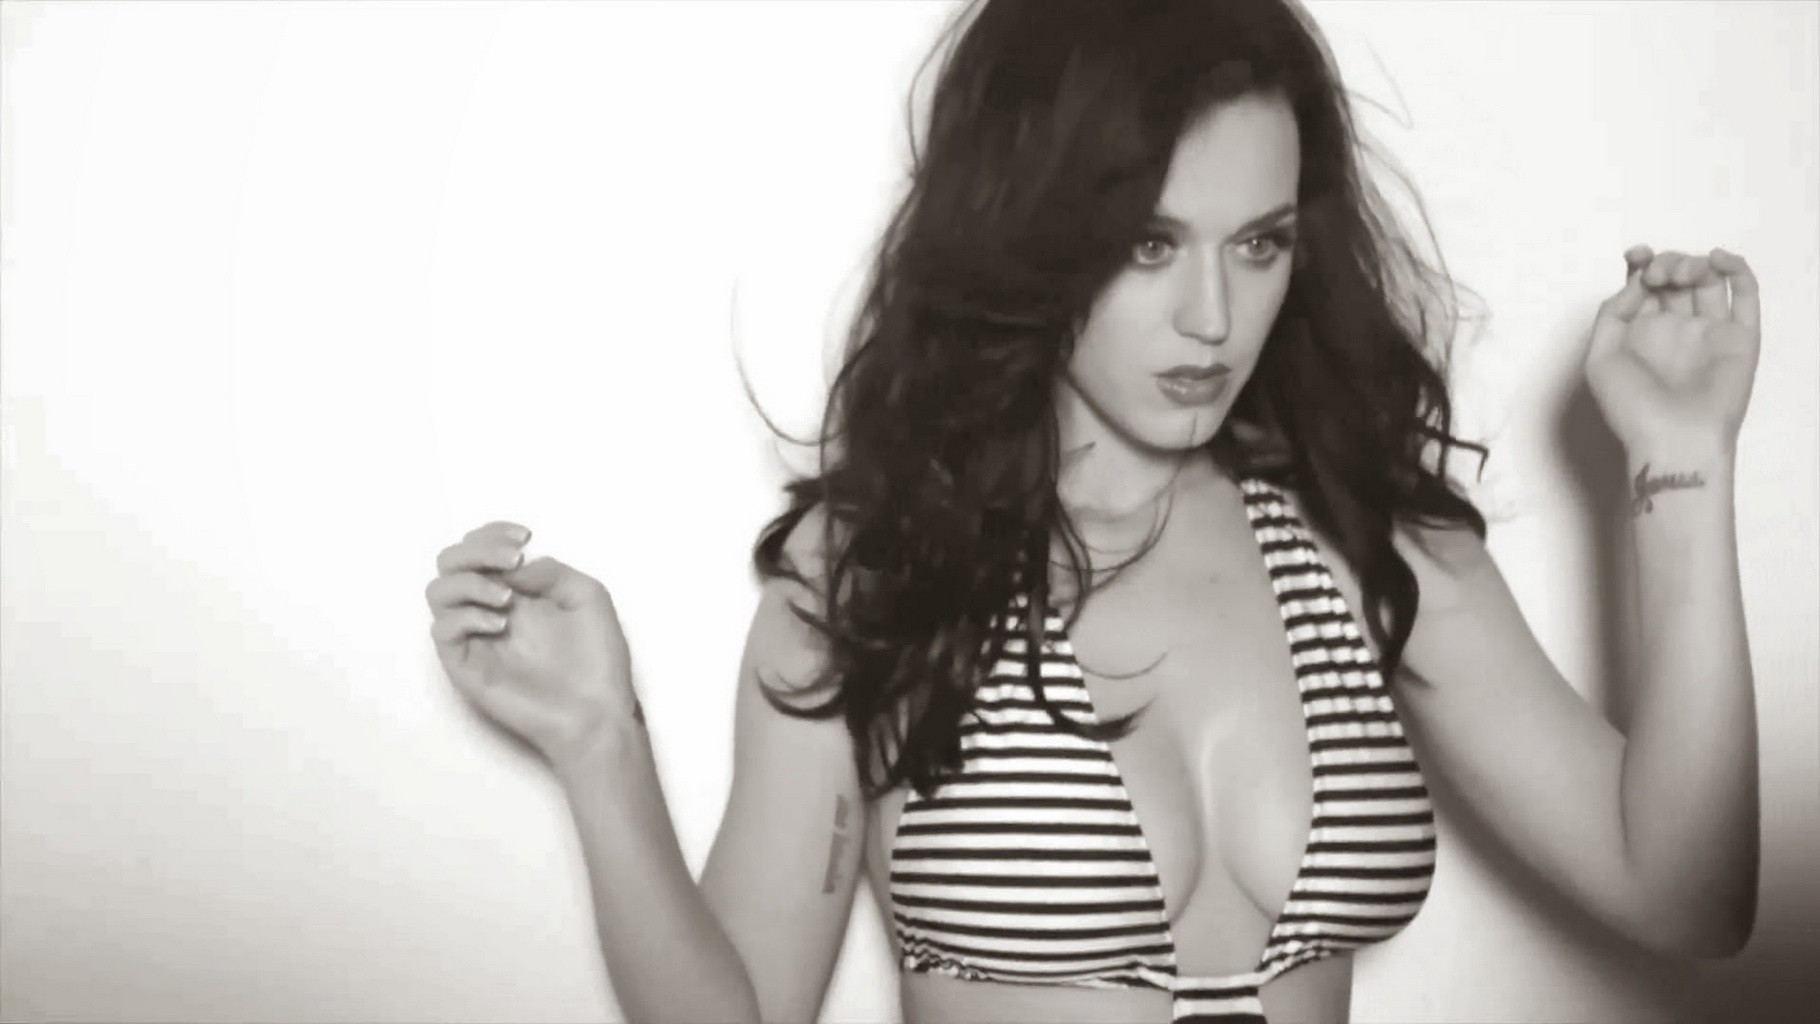 Katy Perry showing off her hot body in lingerie for GQ Magazine 2014 February is #75206654